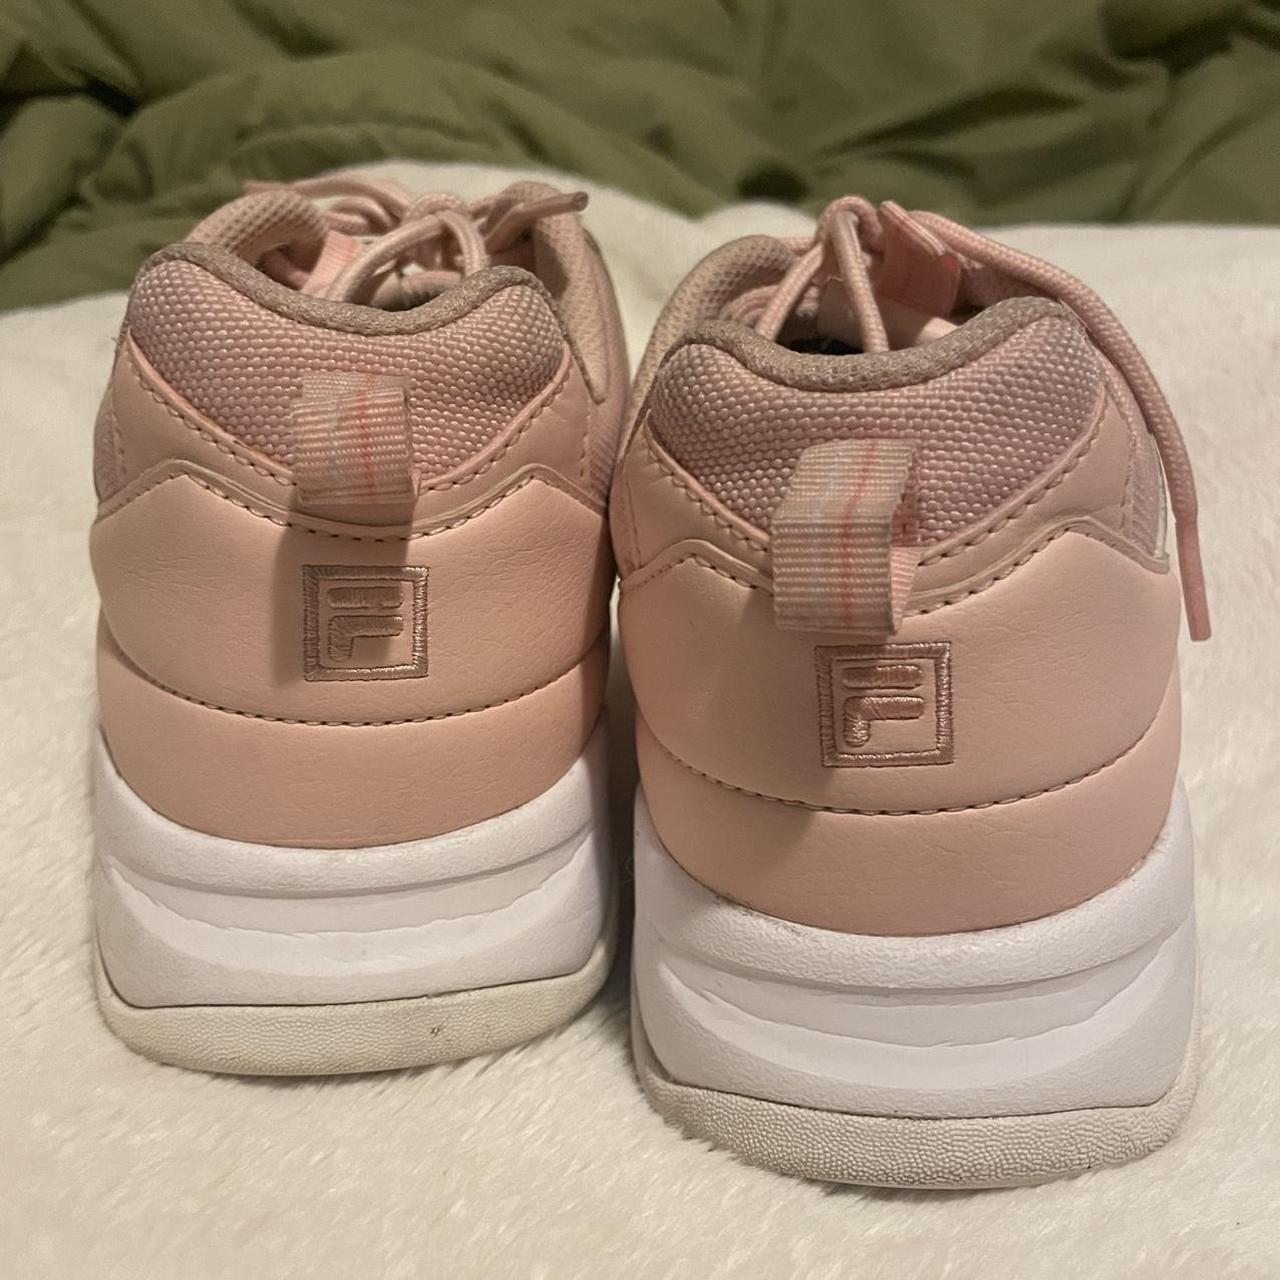 Worn light pink and white FILAs size 6 Bought in... - Depop